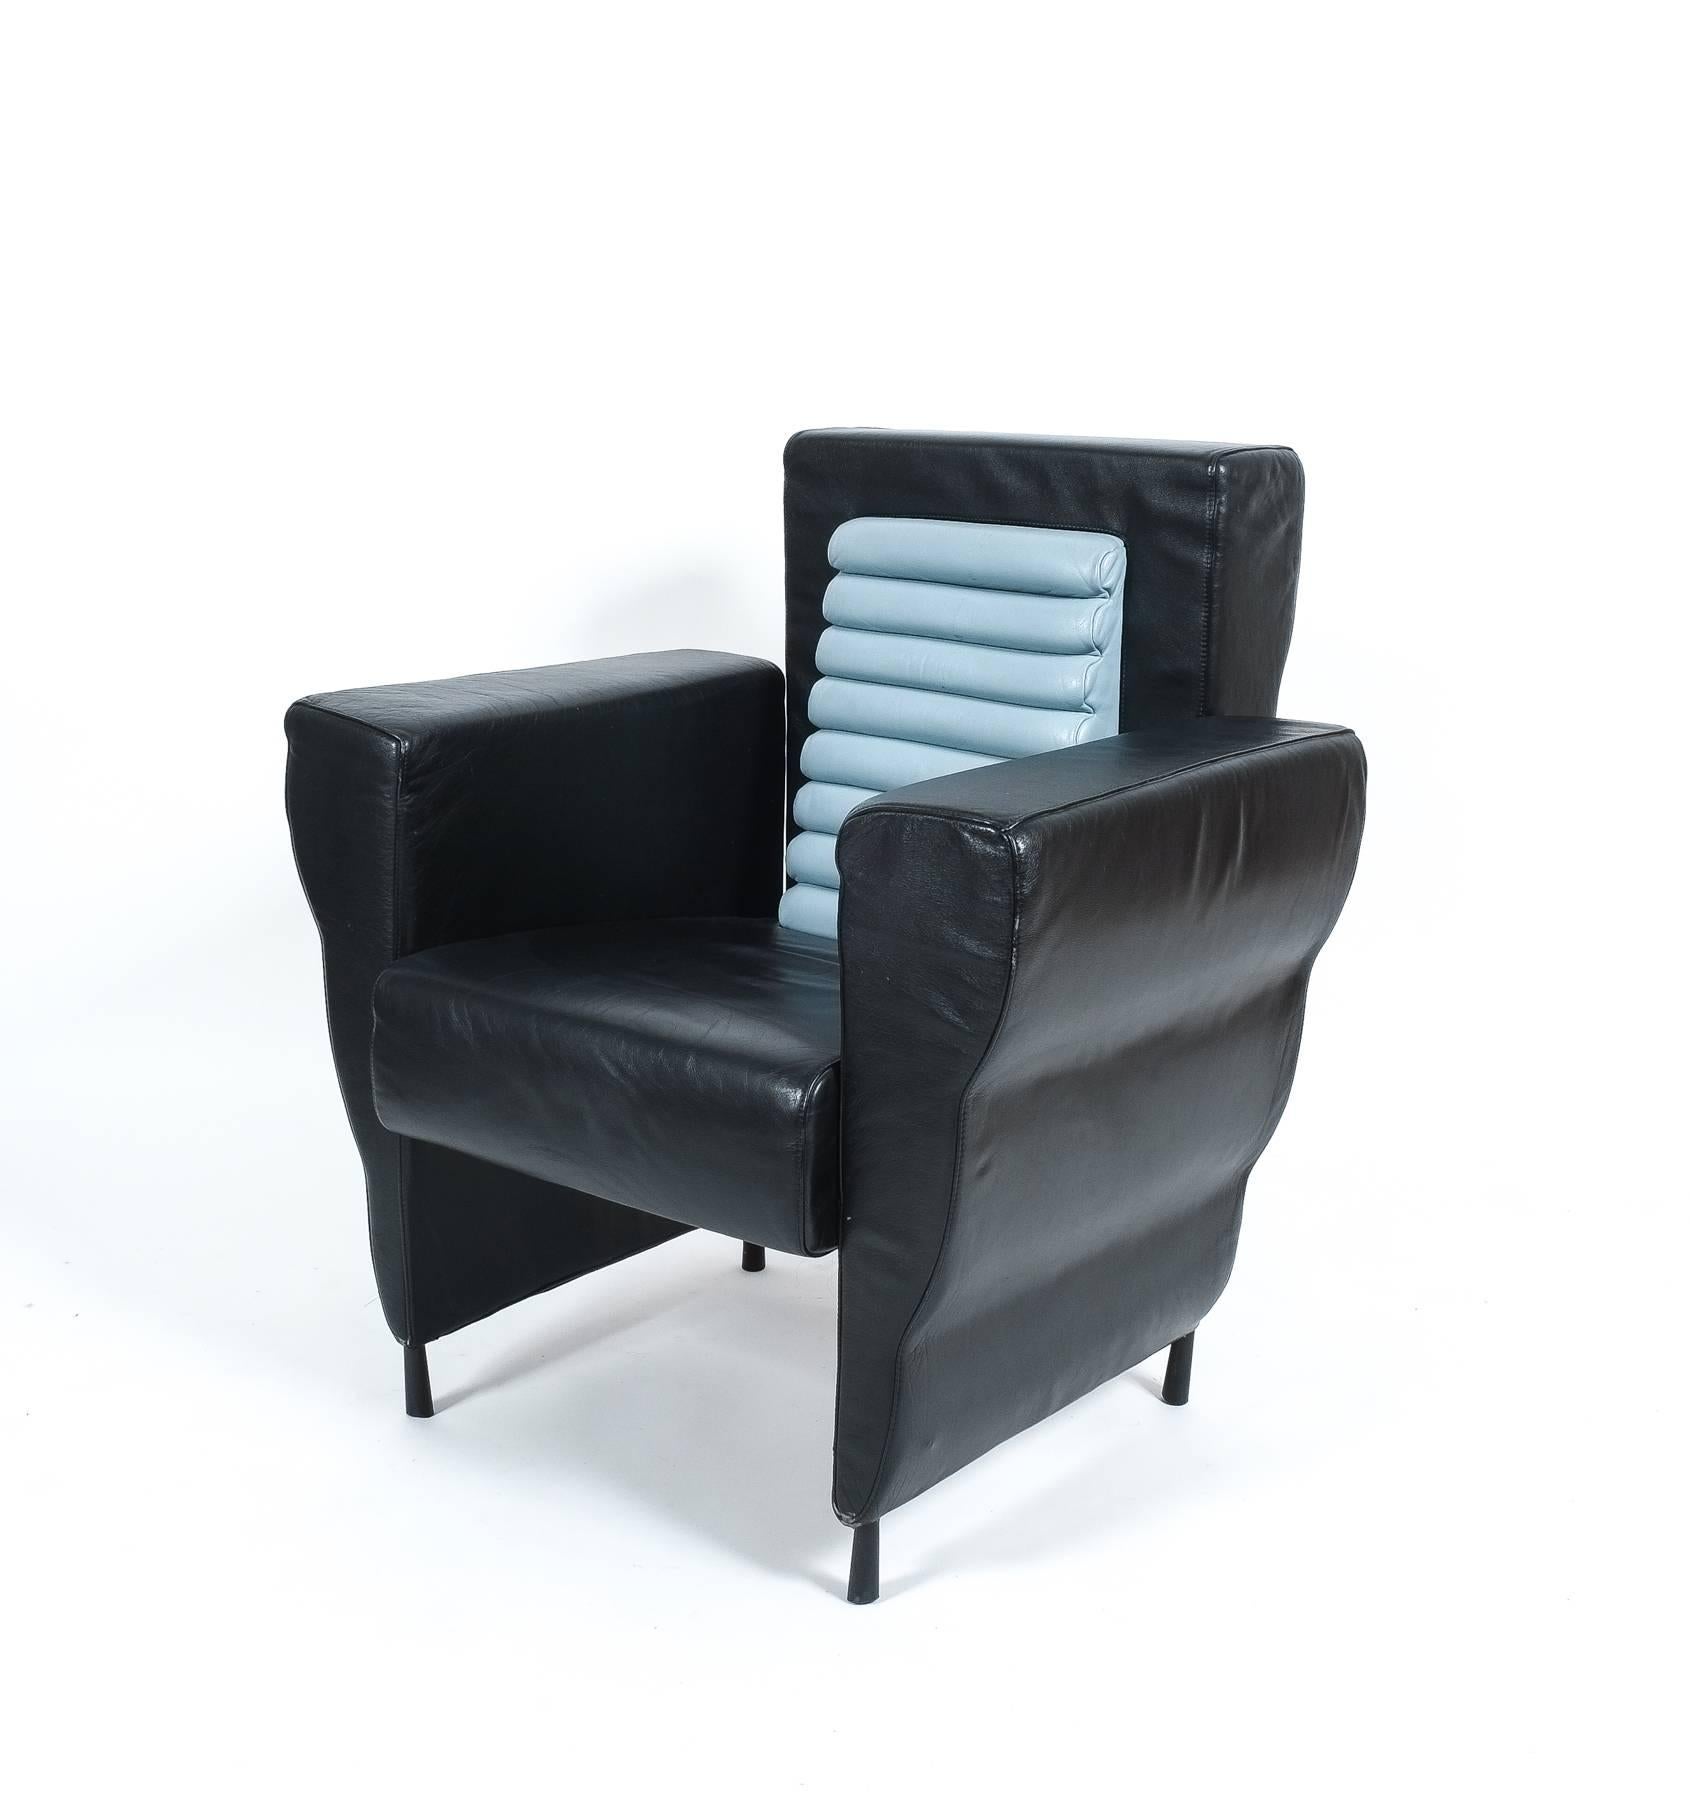 Rare leather armchair from the Flessuosa series by Ugo La Pietra for Busnelli, Italy, 1985. Comfortable smooth leather seater with a blueish grey leather inset from one of the former founding members of famous Italian avant-garde group Archizoom.